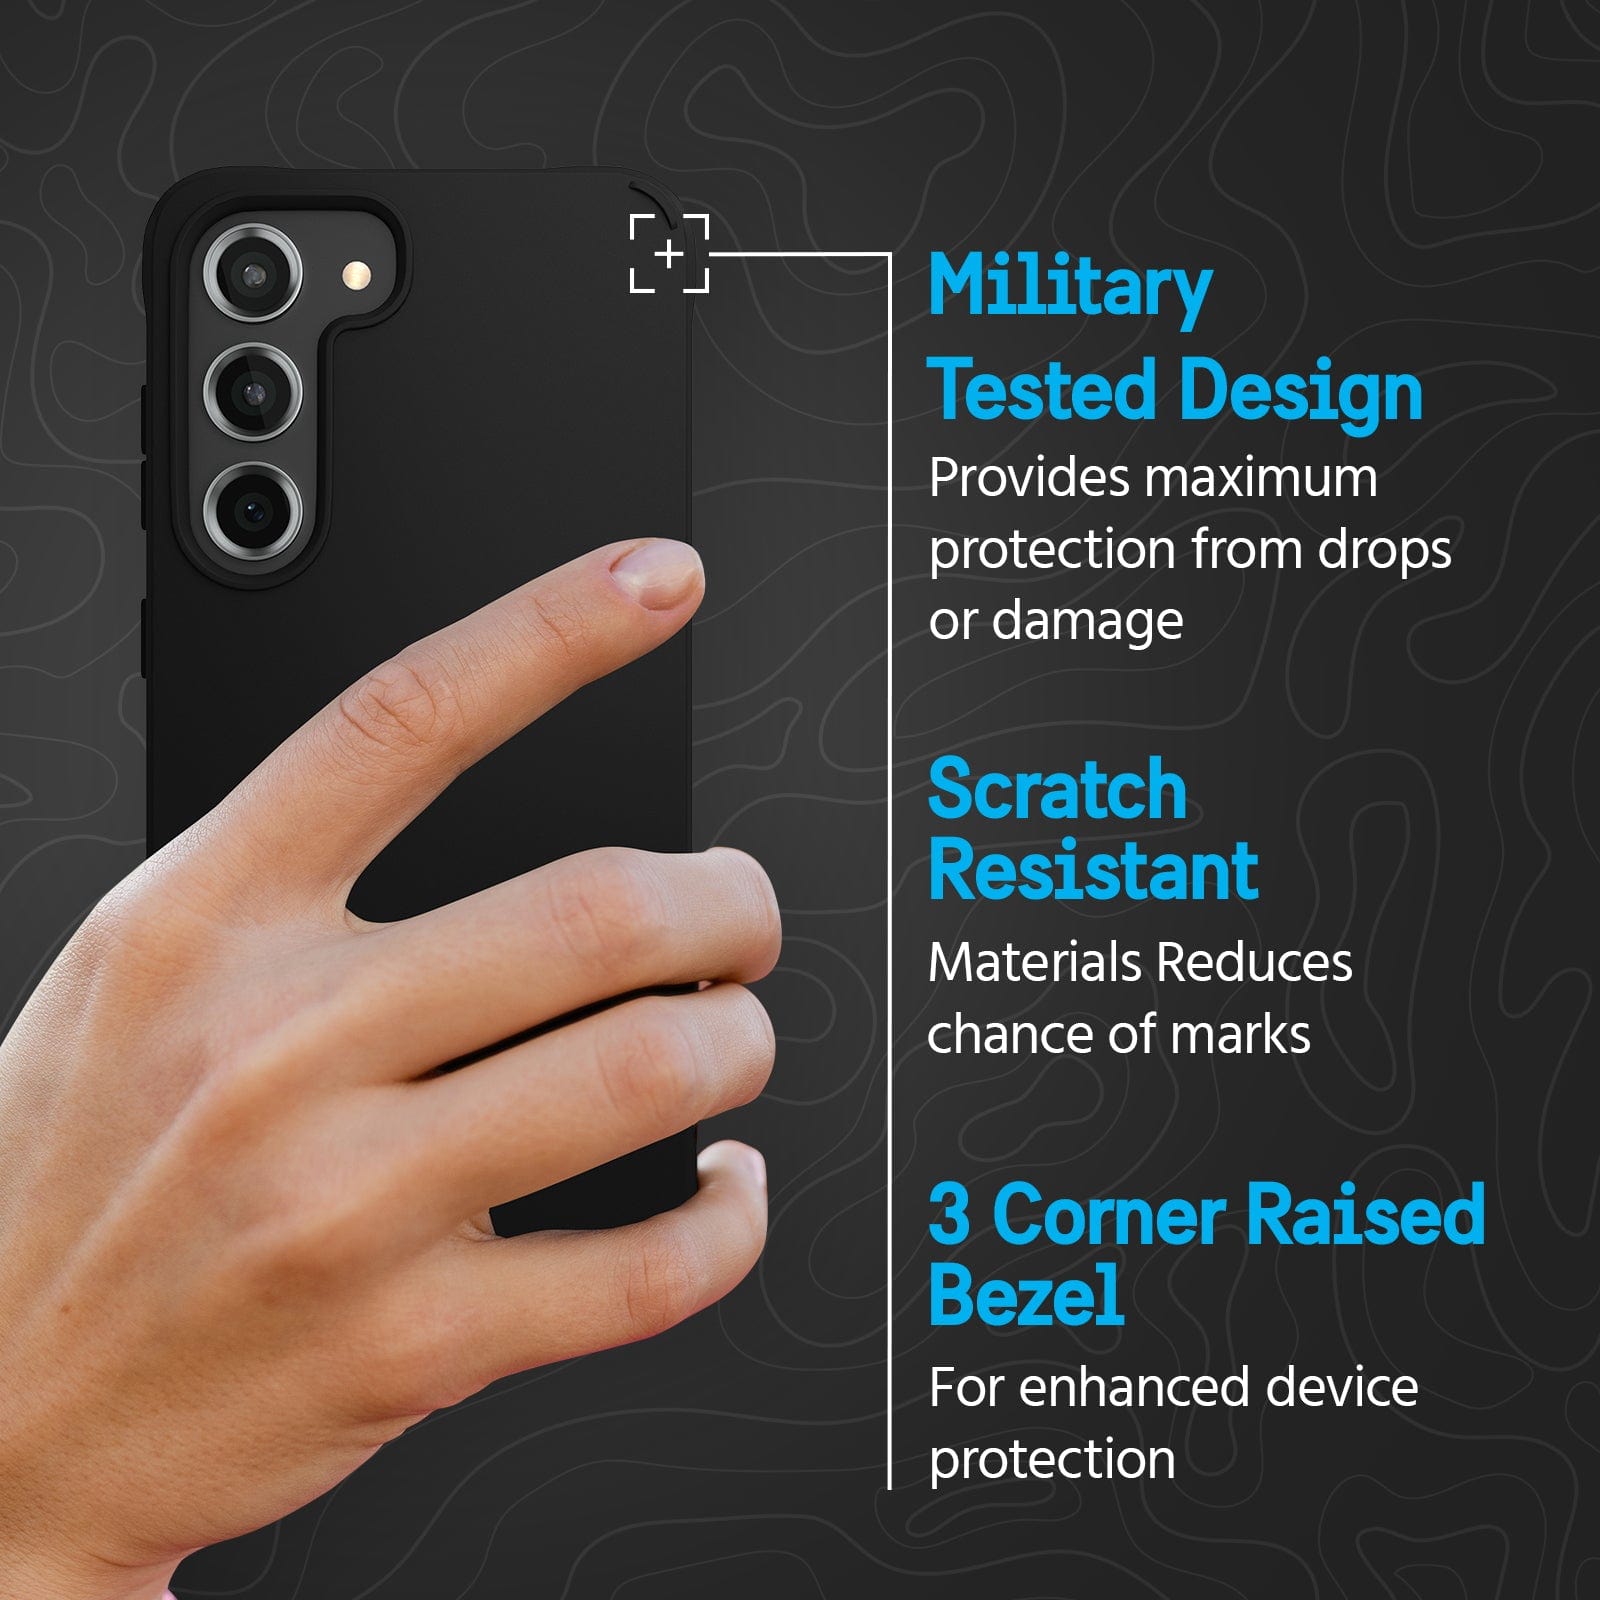 MILITARY TESTED DESIGN. PROVIDES MAXIMUM PROTECTION FROM DROPS OR DAMAGE. SCRATCH RESISTANT MATERIALS REDUCES CHANCE OF MARKS. 3 CORNER RAISED BEZEL FOR ENHANCED DEVICE PROTECTION.